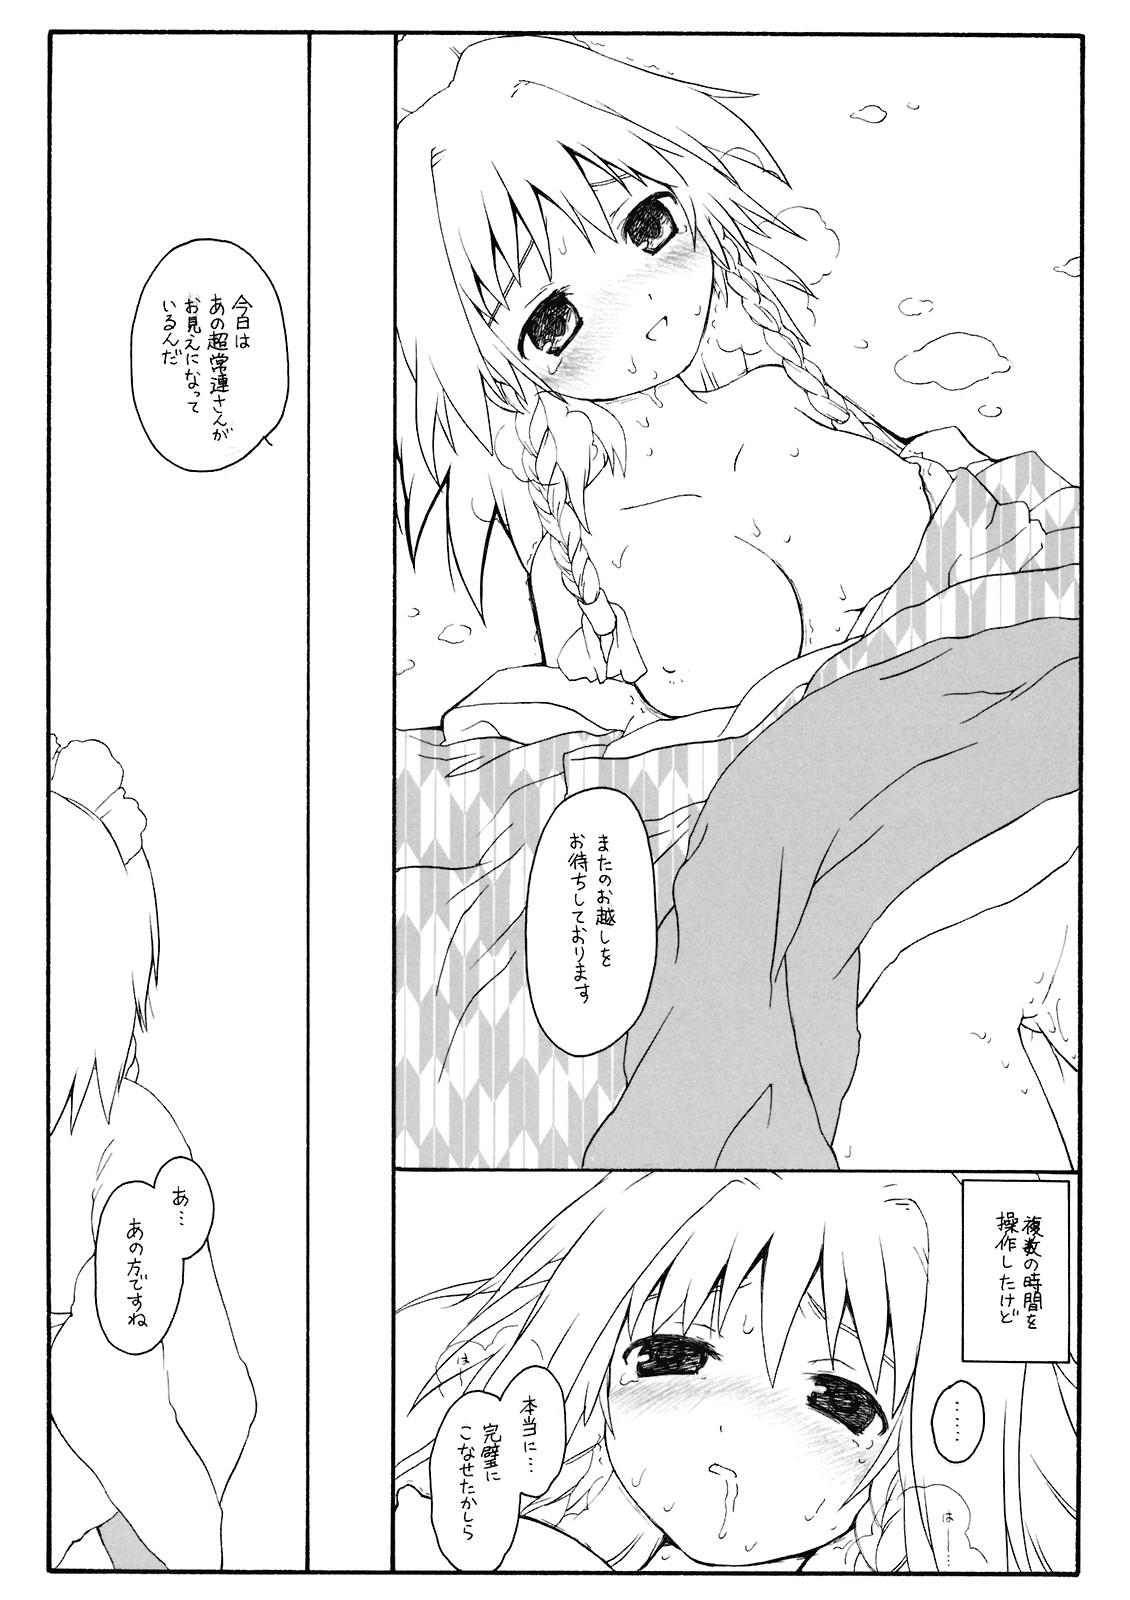 Spooning Aru Omise no Ichinichi Sono 4 - Touhou project Gay Party - Page 10